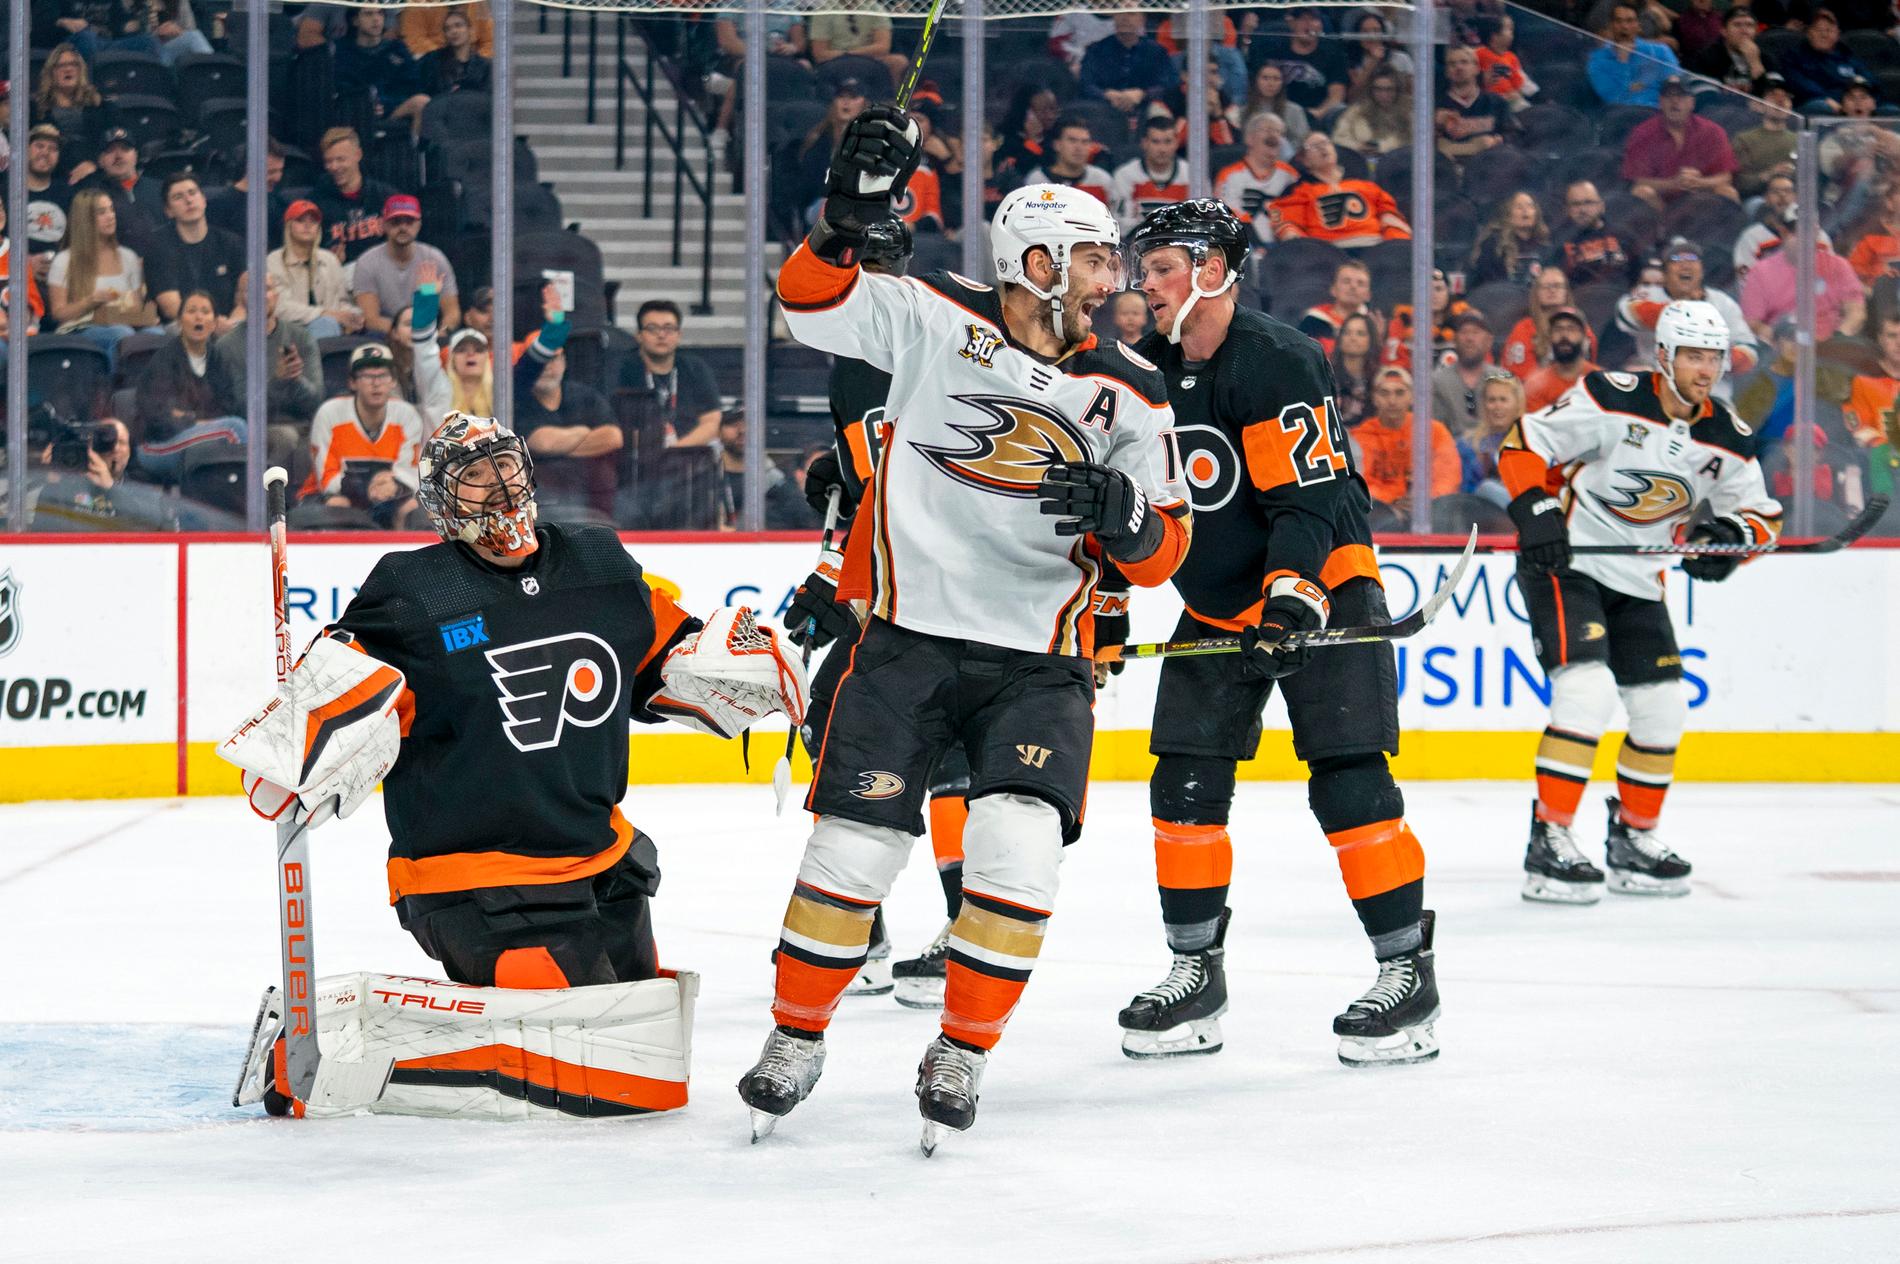 Anaheim’s Dominant Performance: A 7-4 Victory over Philadelphia Flyers in NHL Hockey